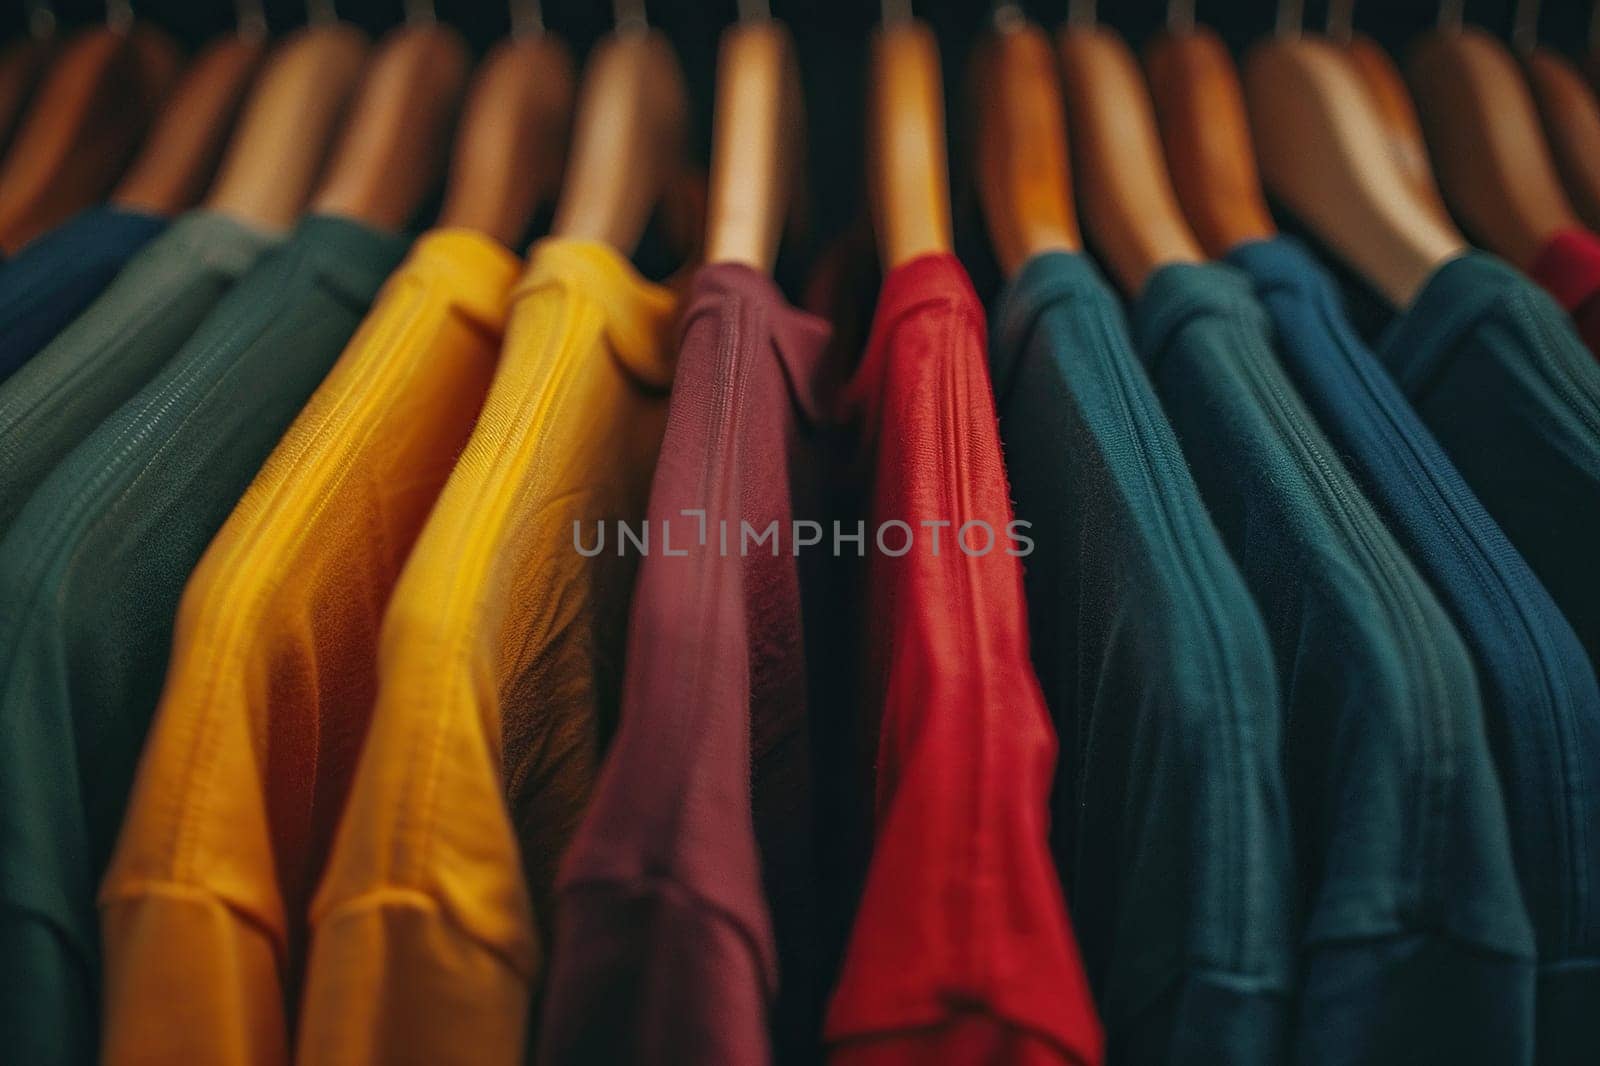 A lot of T-shirts of different colors hang on hangers close-up. Generated by artificial intelligence by Vovmar